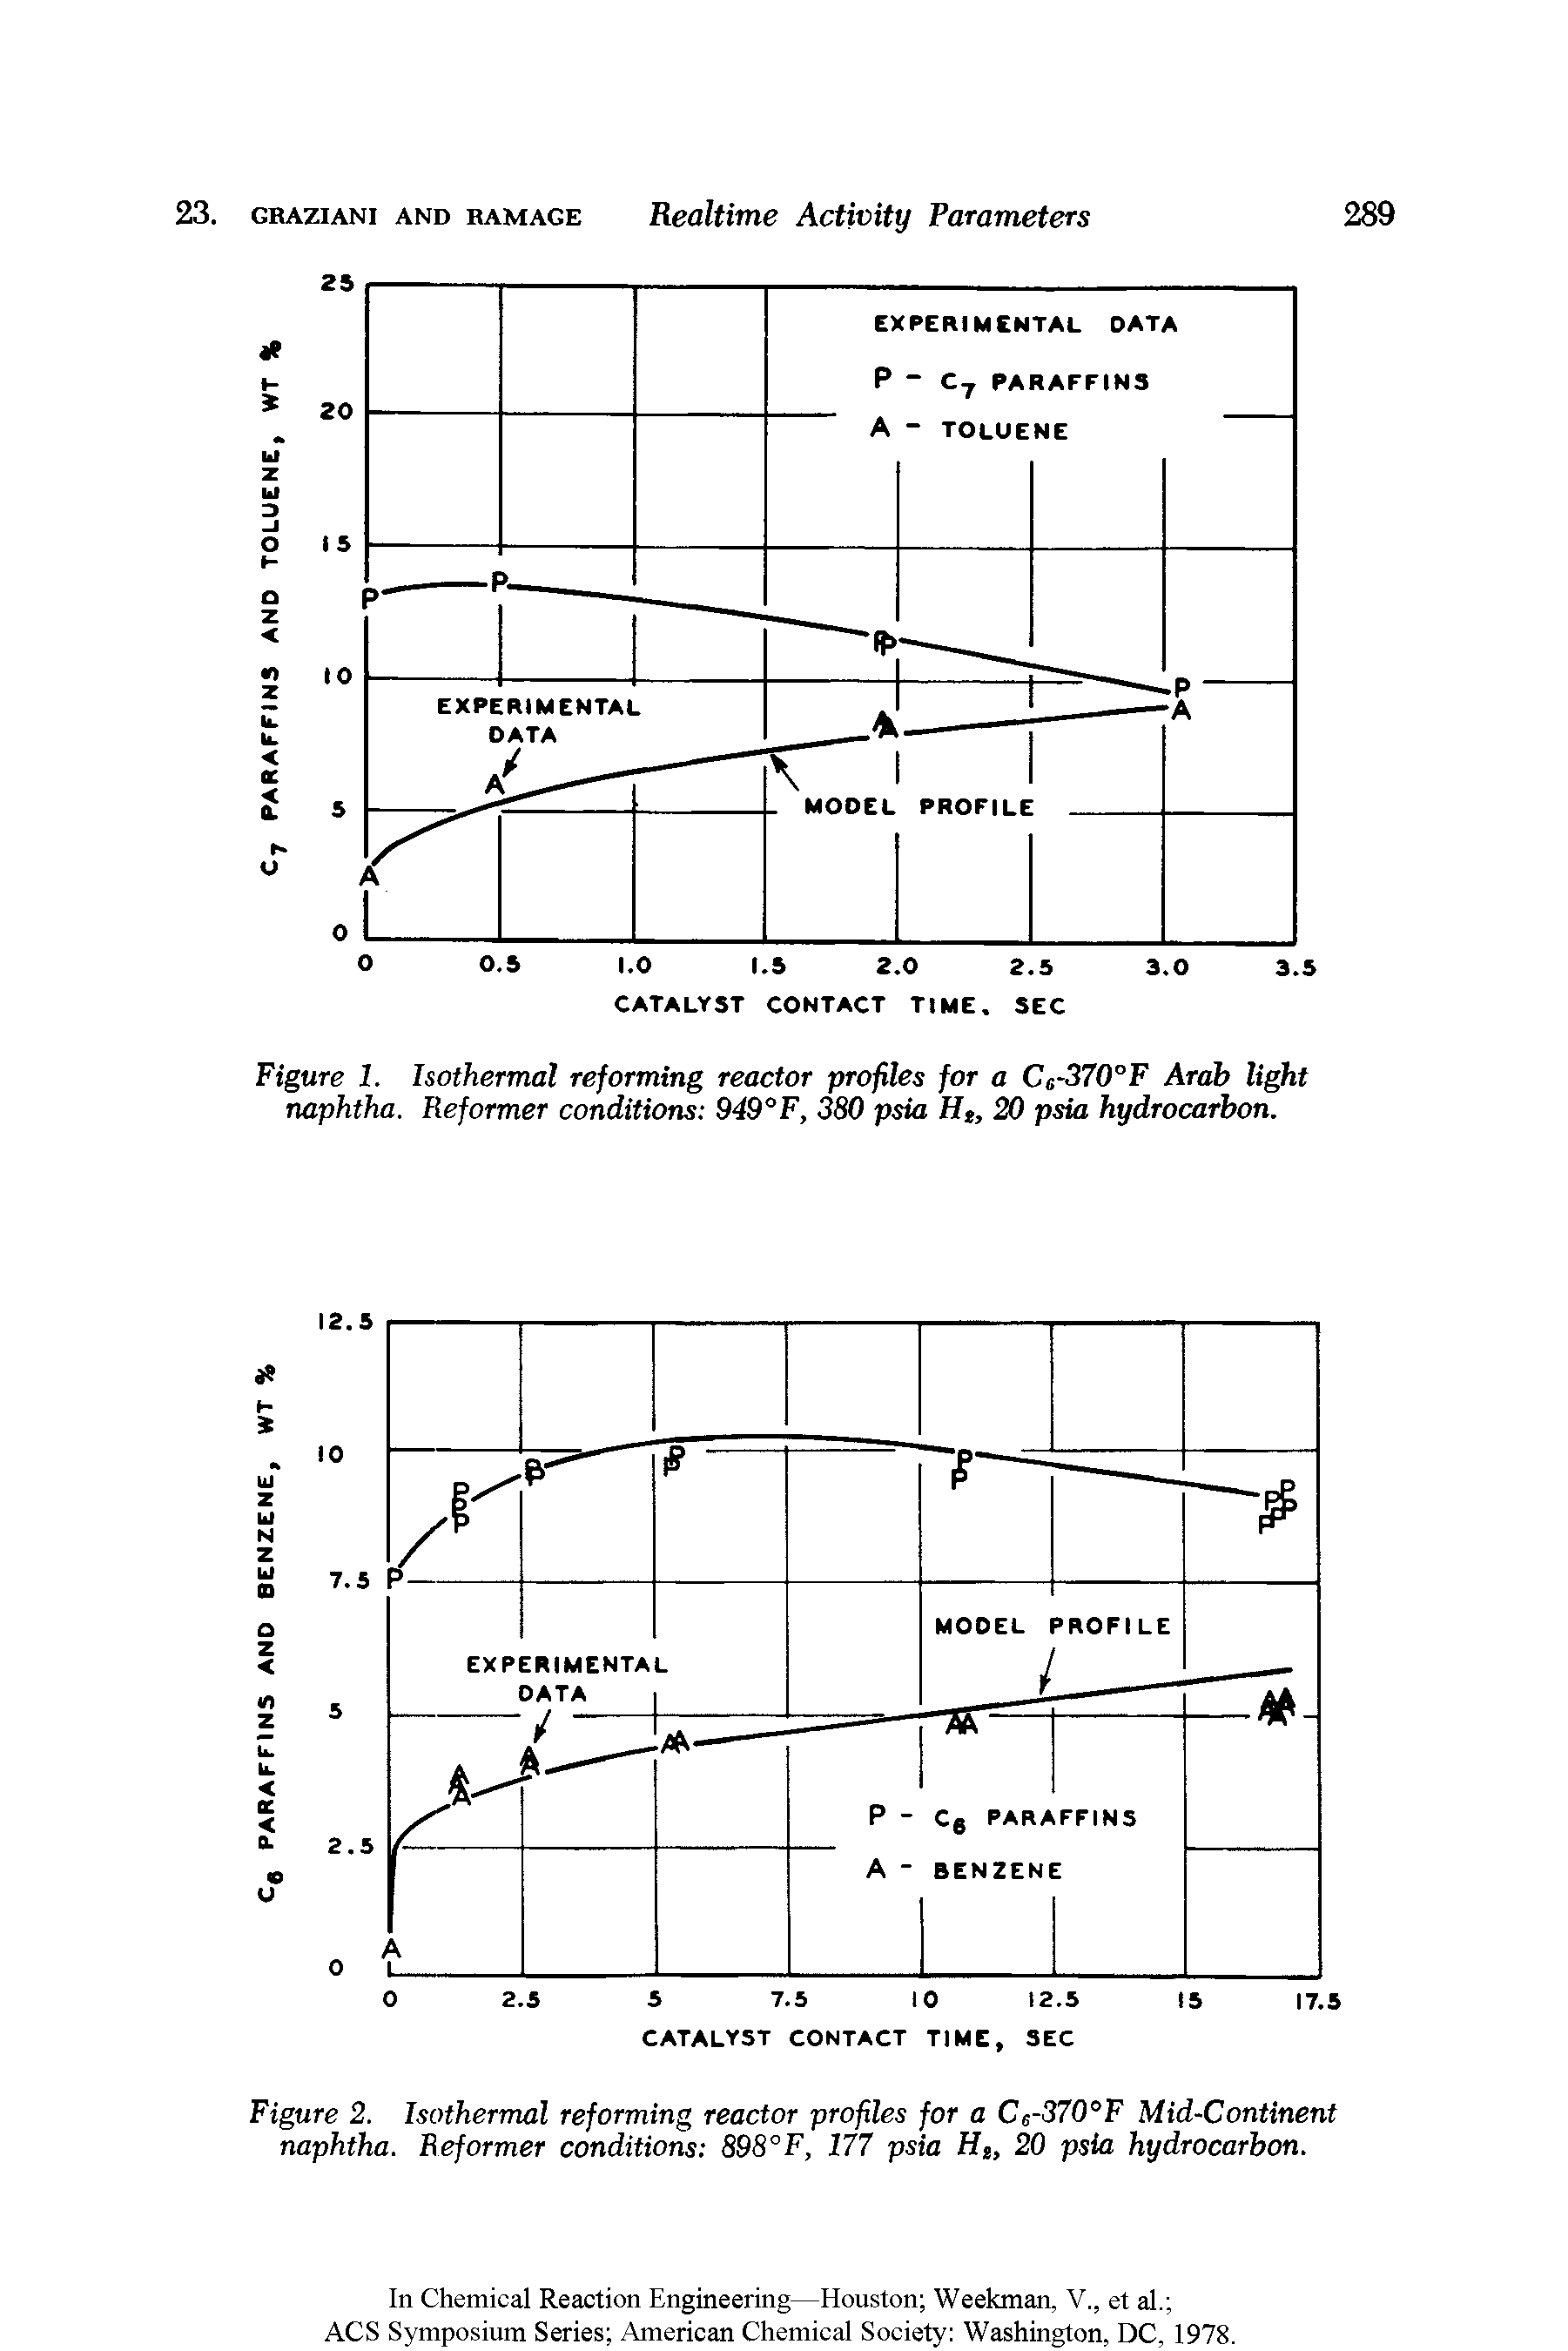 Figure 2. Isothermal reforming reactor profiles for a Ce-370 >F Mid-Continent naphtha. Reformer conditions 898°F, 177 psia H, 20 psia hydrocarbon.